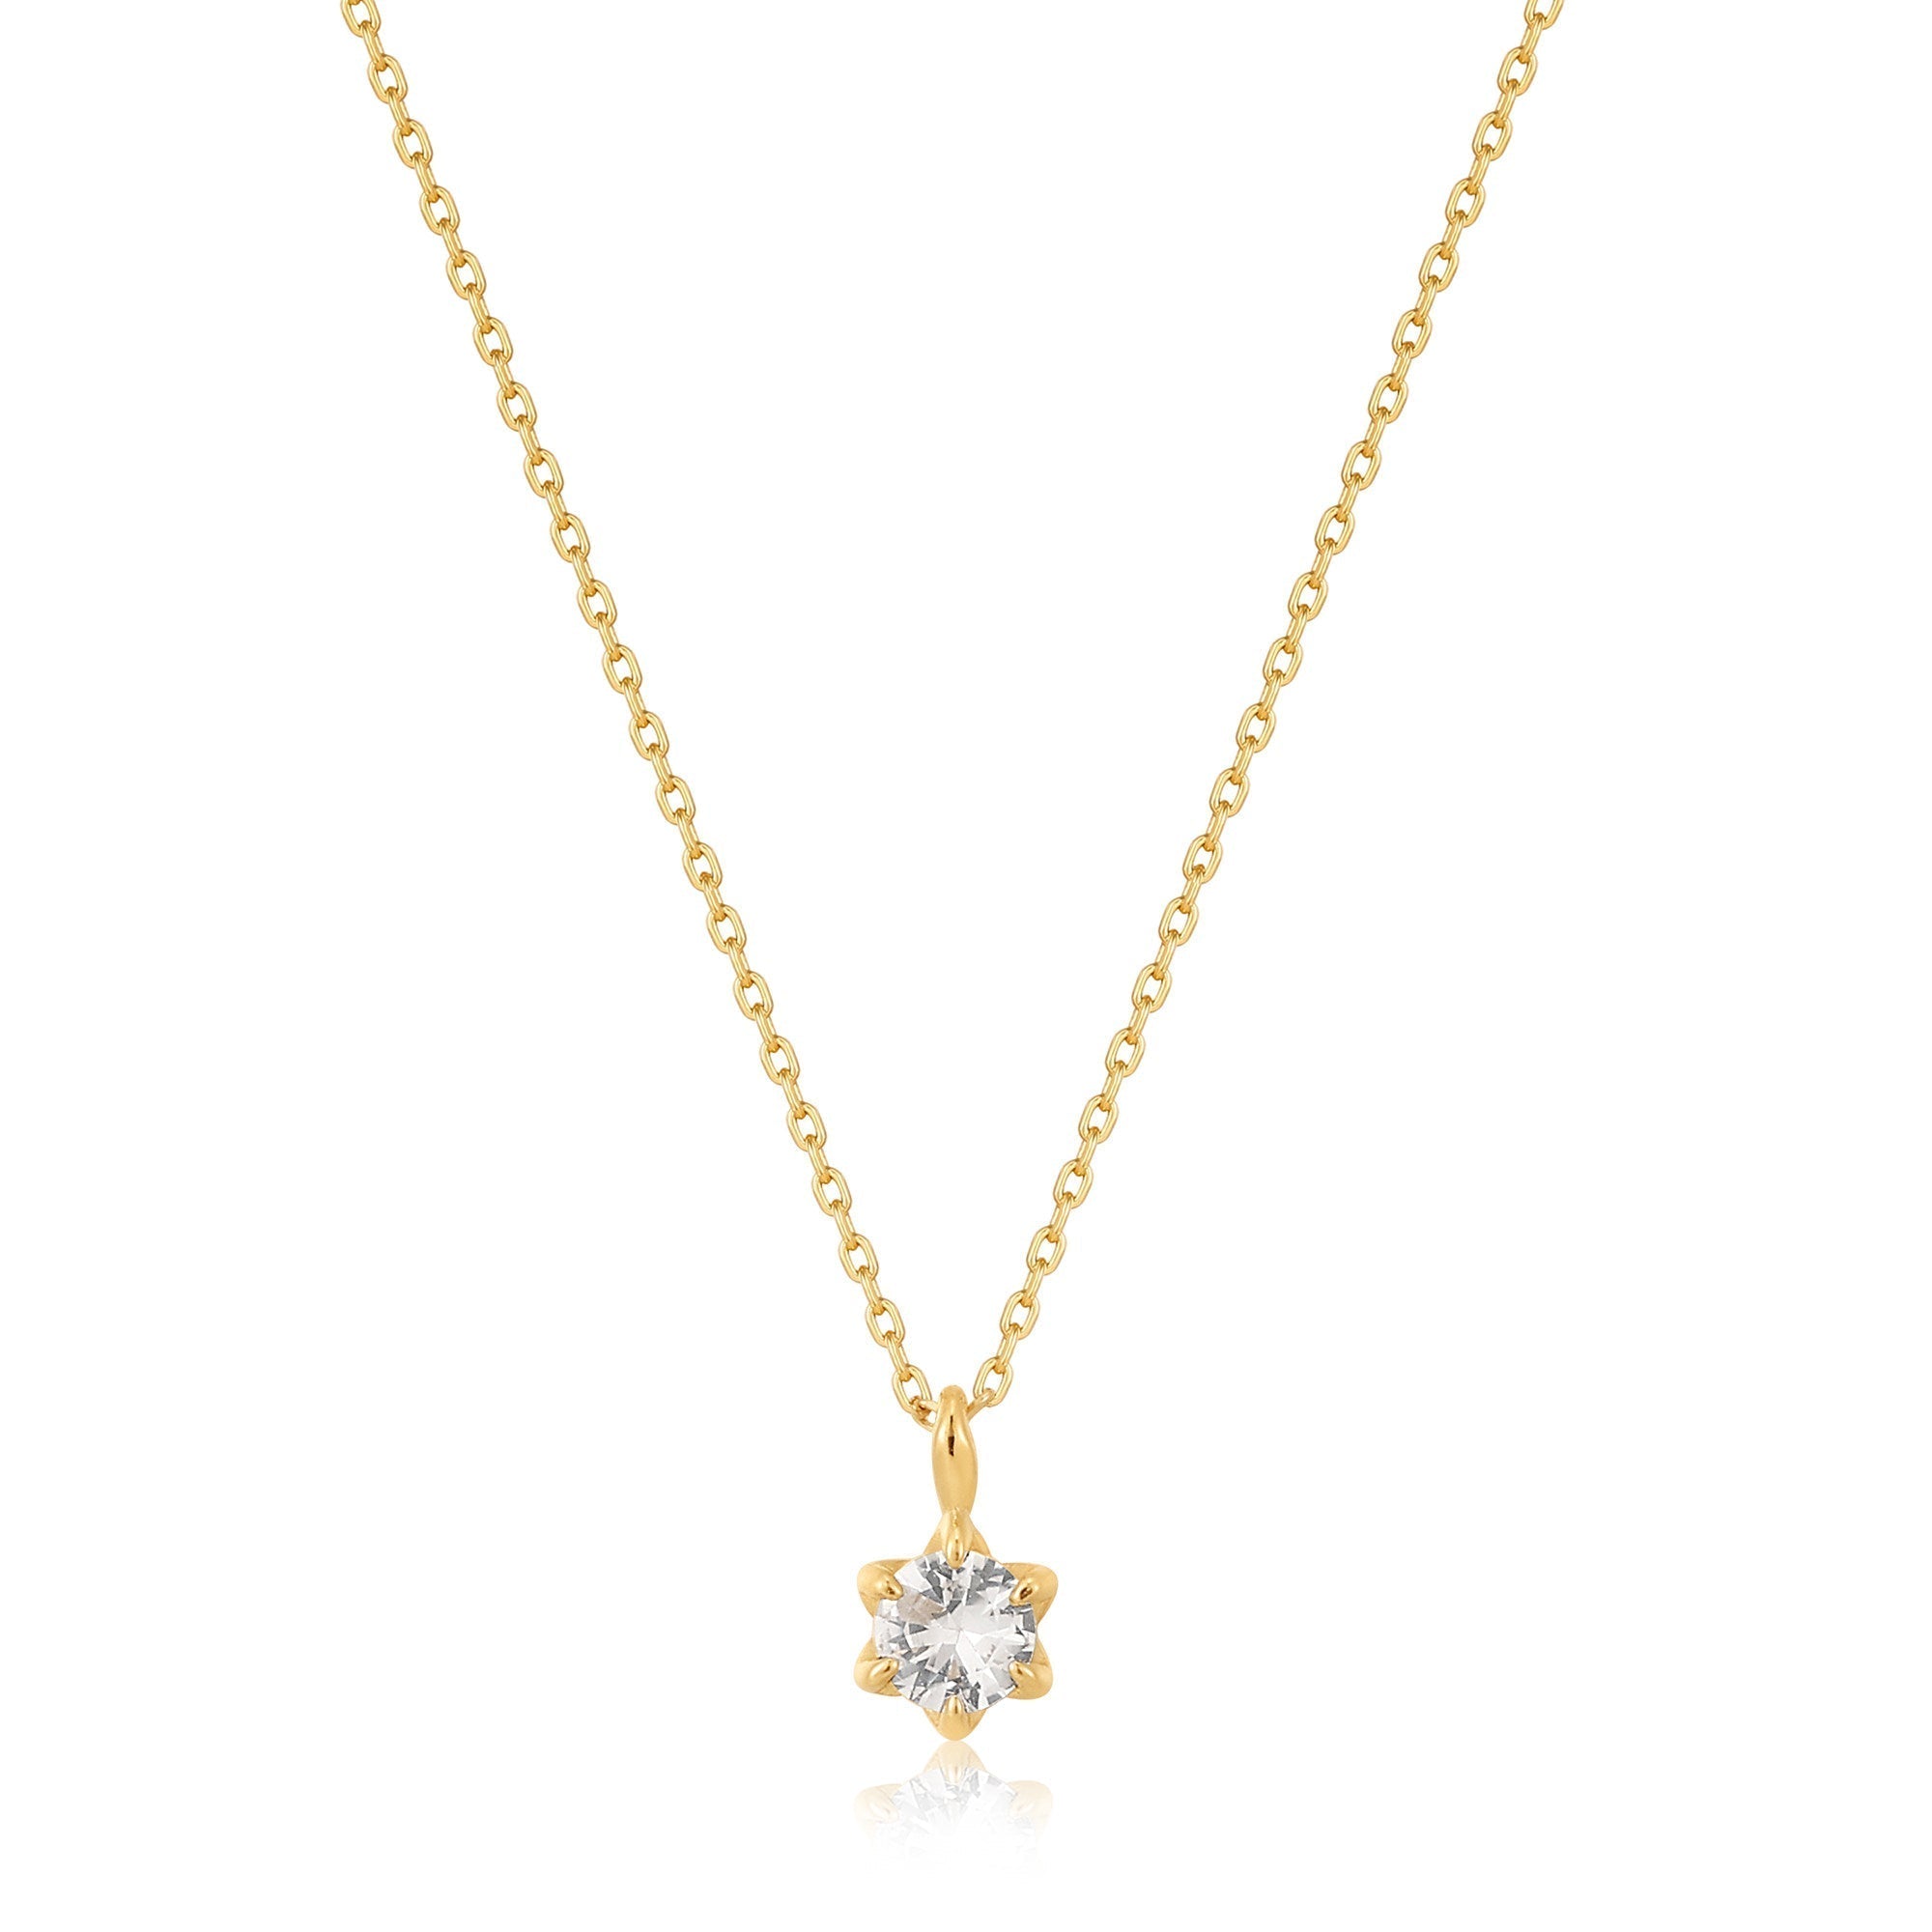 14kt Gold Necklace | The Jewellery Boutique